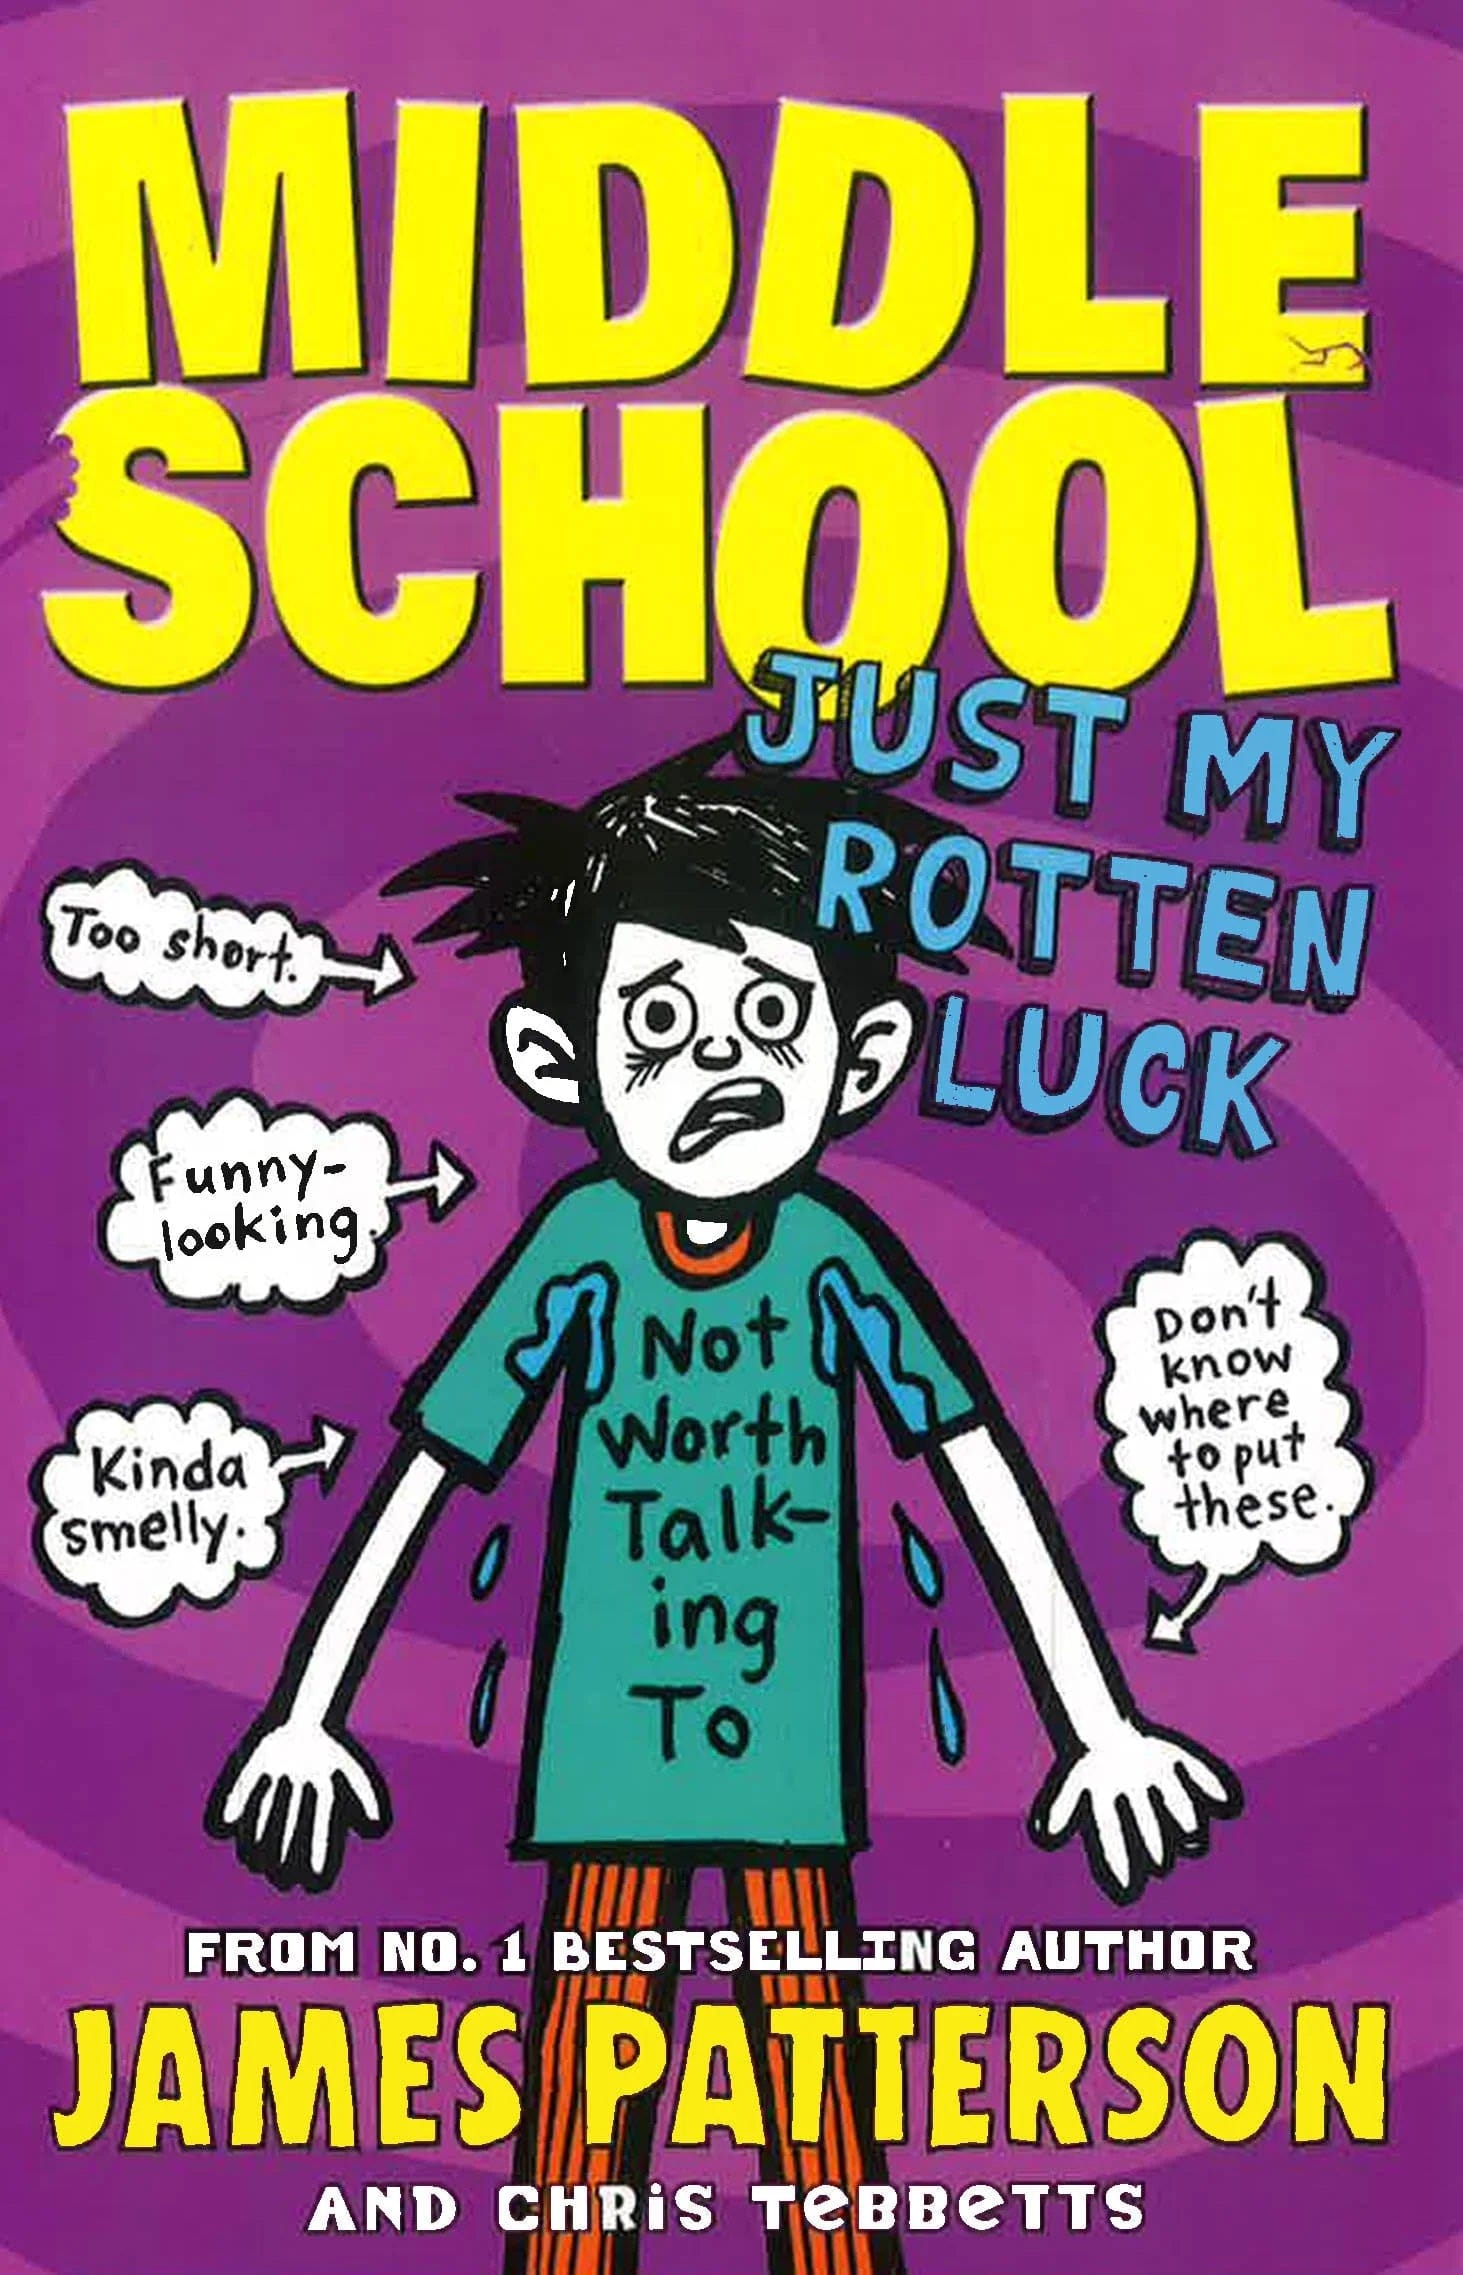 Patterson, James BARGAIN CHILDRENS FICTION New MIDDLE SCHOOL JUST MY ROTTEN LUCK P/B Z44